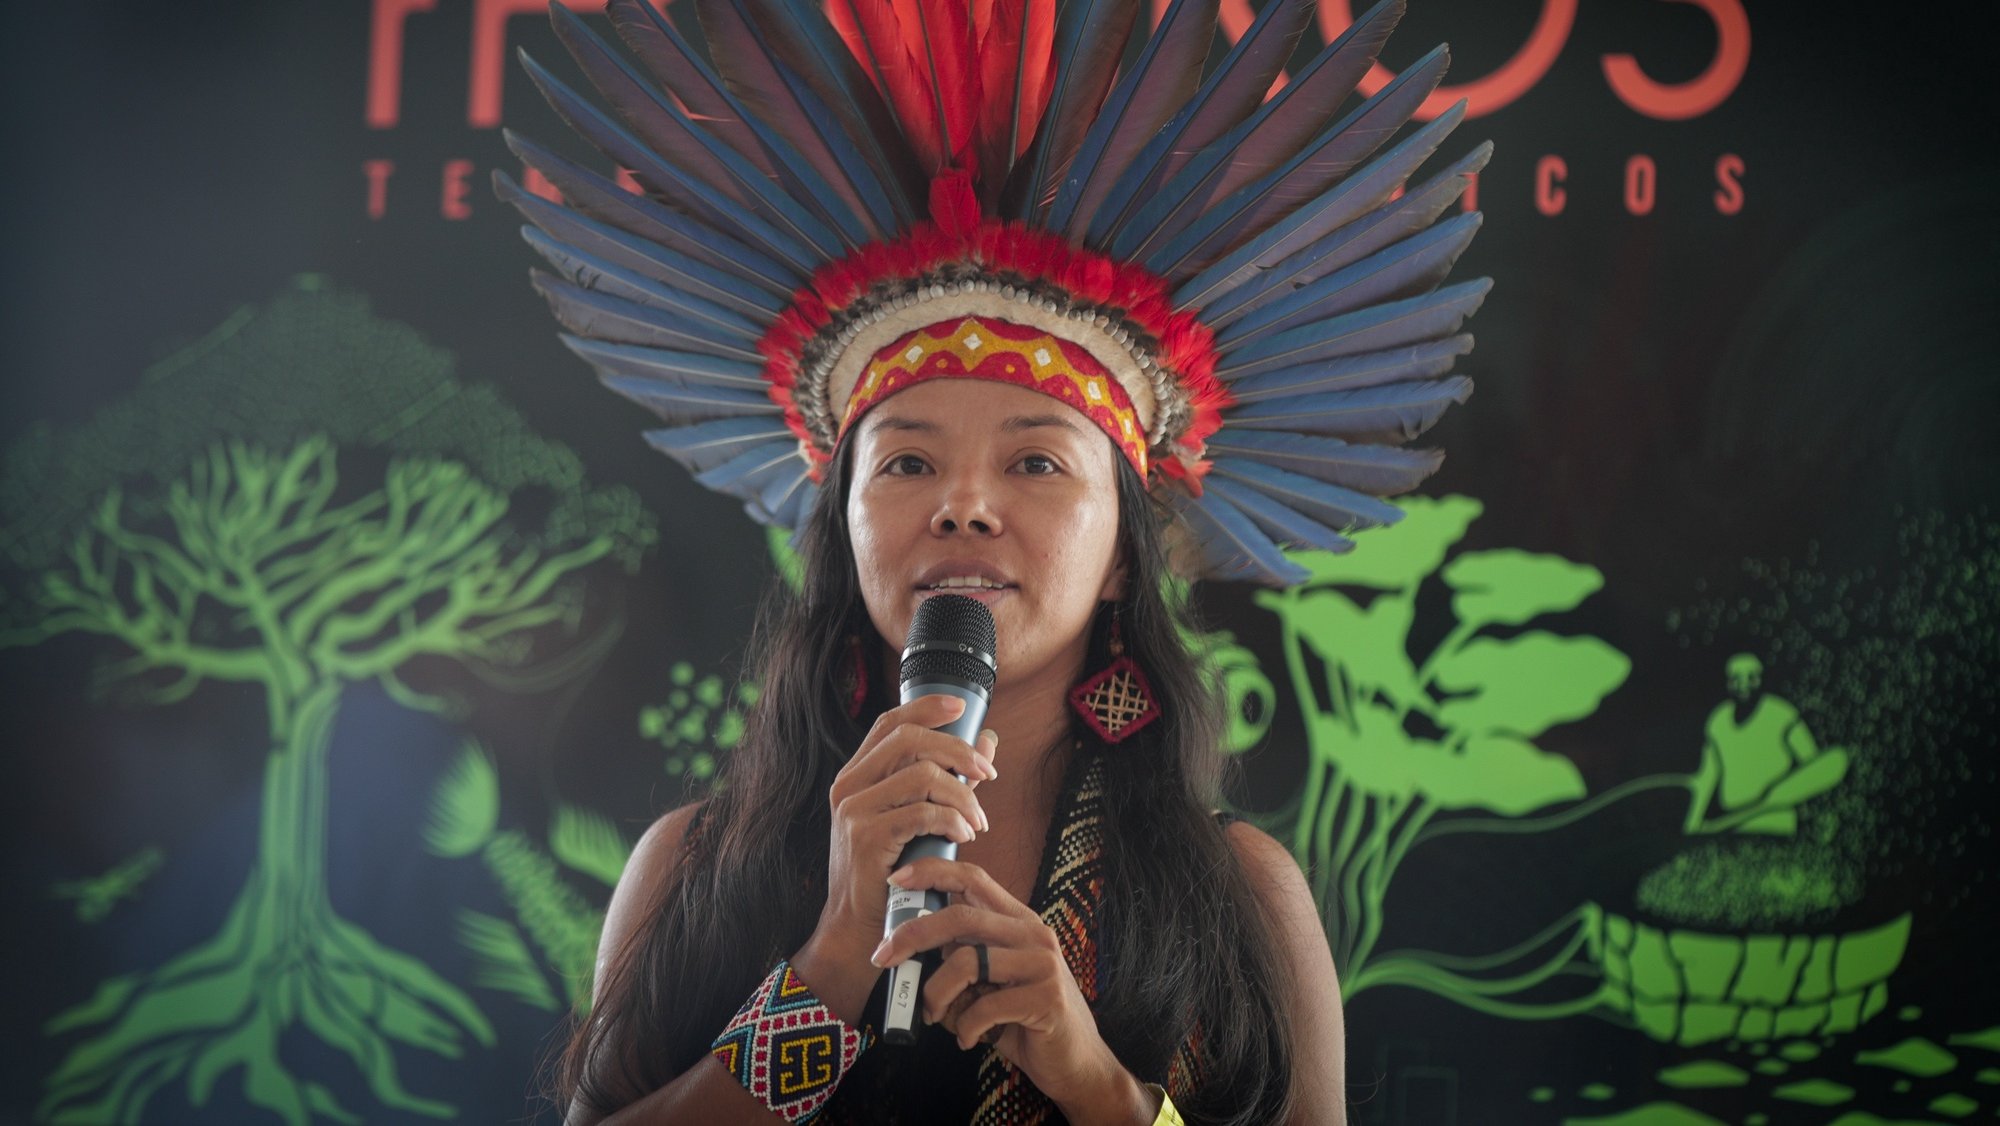 epa09646880 Indigenous Vanda Ortega, from the Witoto people, speaks during the opening of the exhibition &#039;Fruturos - Tempos Amazonicos&#039; (Fruits - Amazon Times) at the Amanha Museum in Rio de Janeiro, Brazil, 16 December 2021 (issued 17 December 2021). The immensity of the Amazon, its richness, the ethnic groups that live there and their customs, are part of an exhibition in Rio de Janeiro that from 17 December on immerses the viewer in the reality of the most extensive tropical forest on the planet to highlight the urgency of its conservation. The exhibition &#039;Futures&#039;, which can be seen until June 2022 at the Museum of Tomorrow in Rio, brings an updated perspective of this biome and proposes new challenges to keep the forest standing.  EPA/Andre Coelho